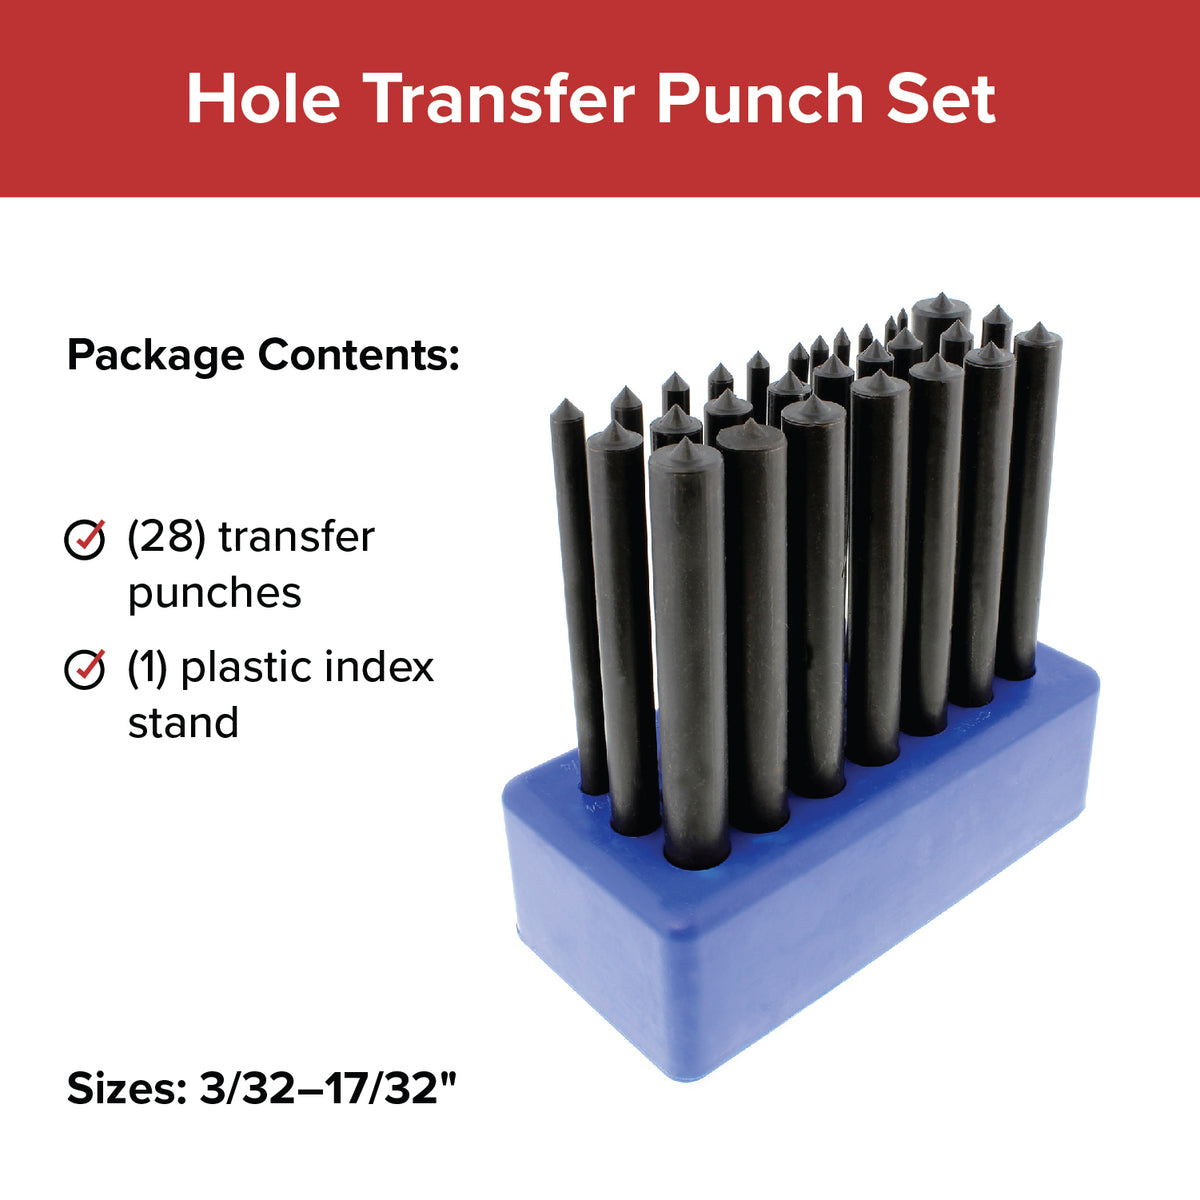 Hole Transfer Punch Set 28 Piece Transfer Punch Set 3/32 to 17/32 Inch